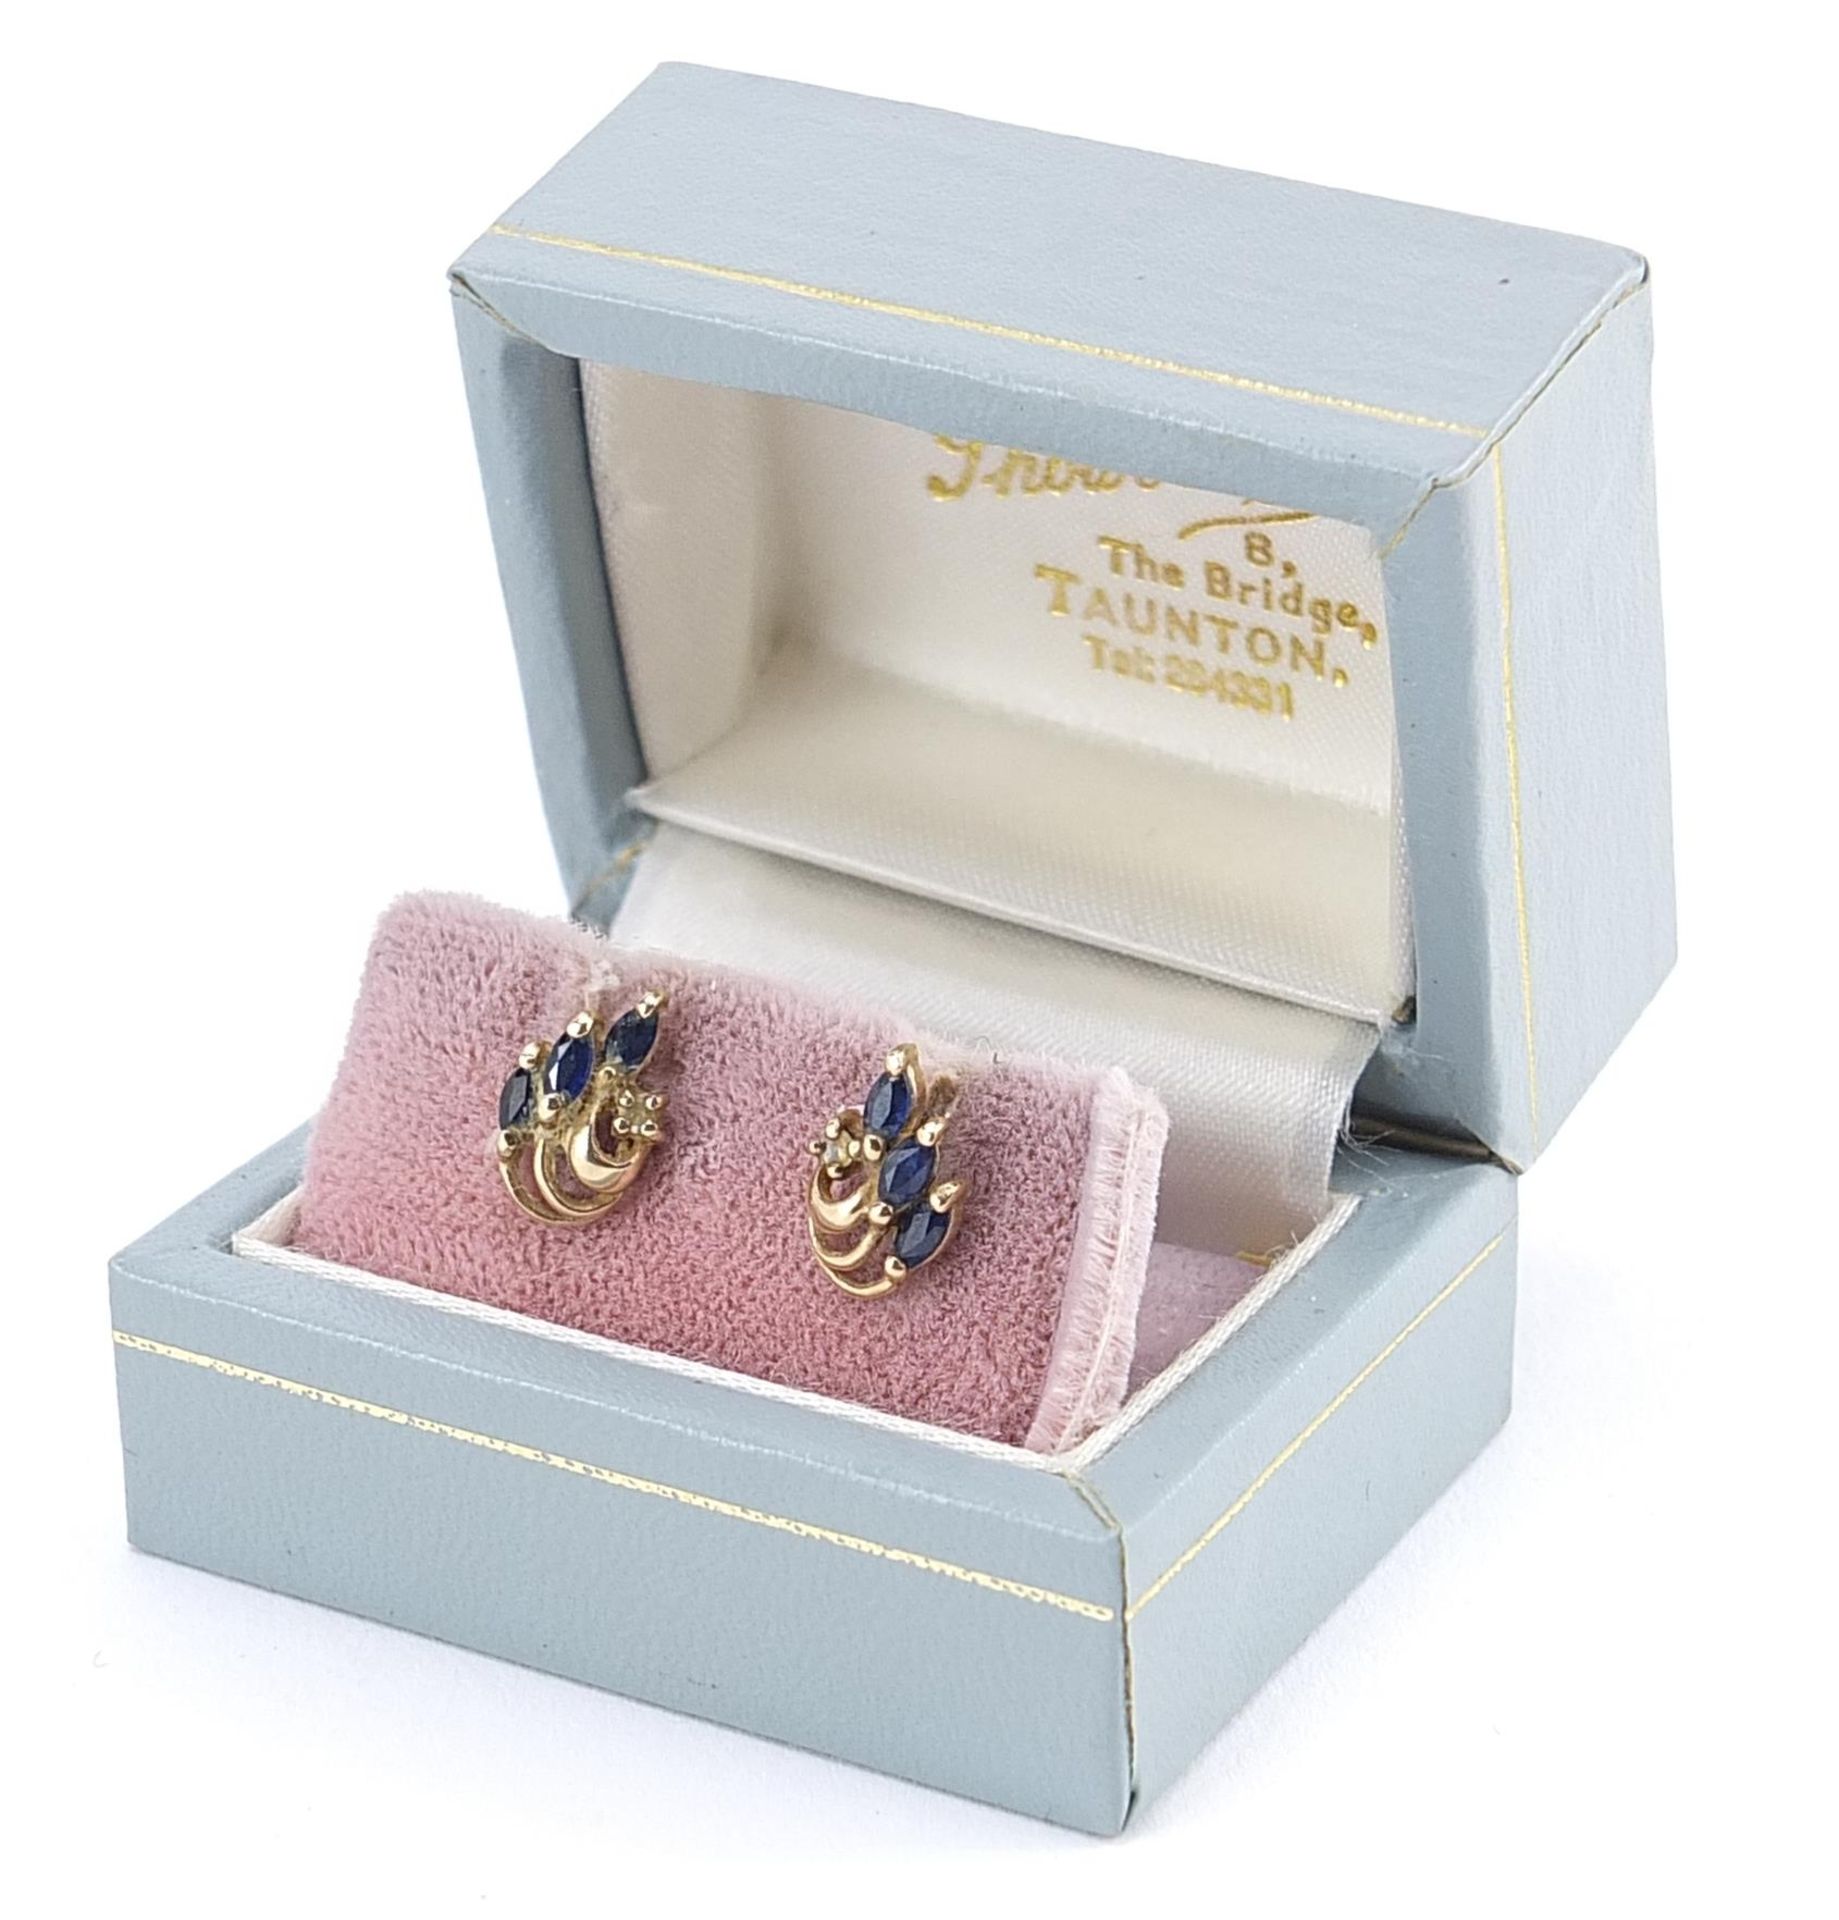 Pair of 9ct gold blue and white sapphire stud earrings housed in a Showerings Taunton box, 1.2cm - Bild 3 aus 3